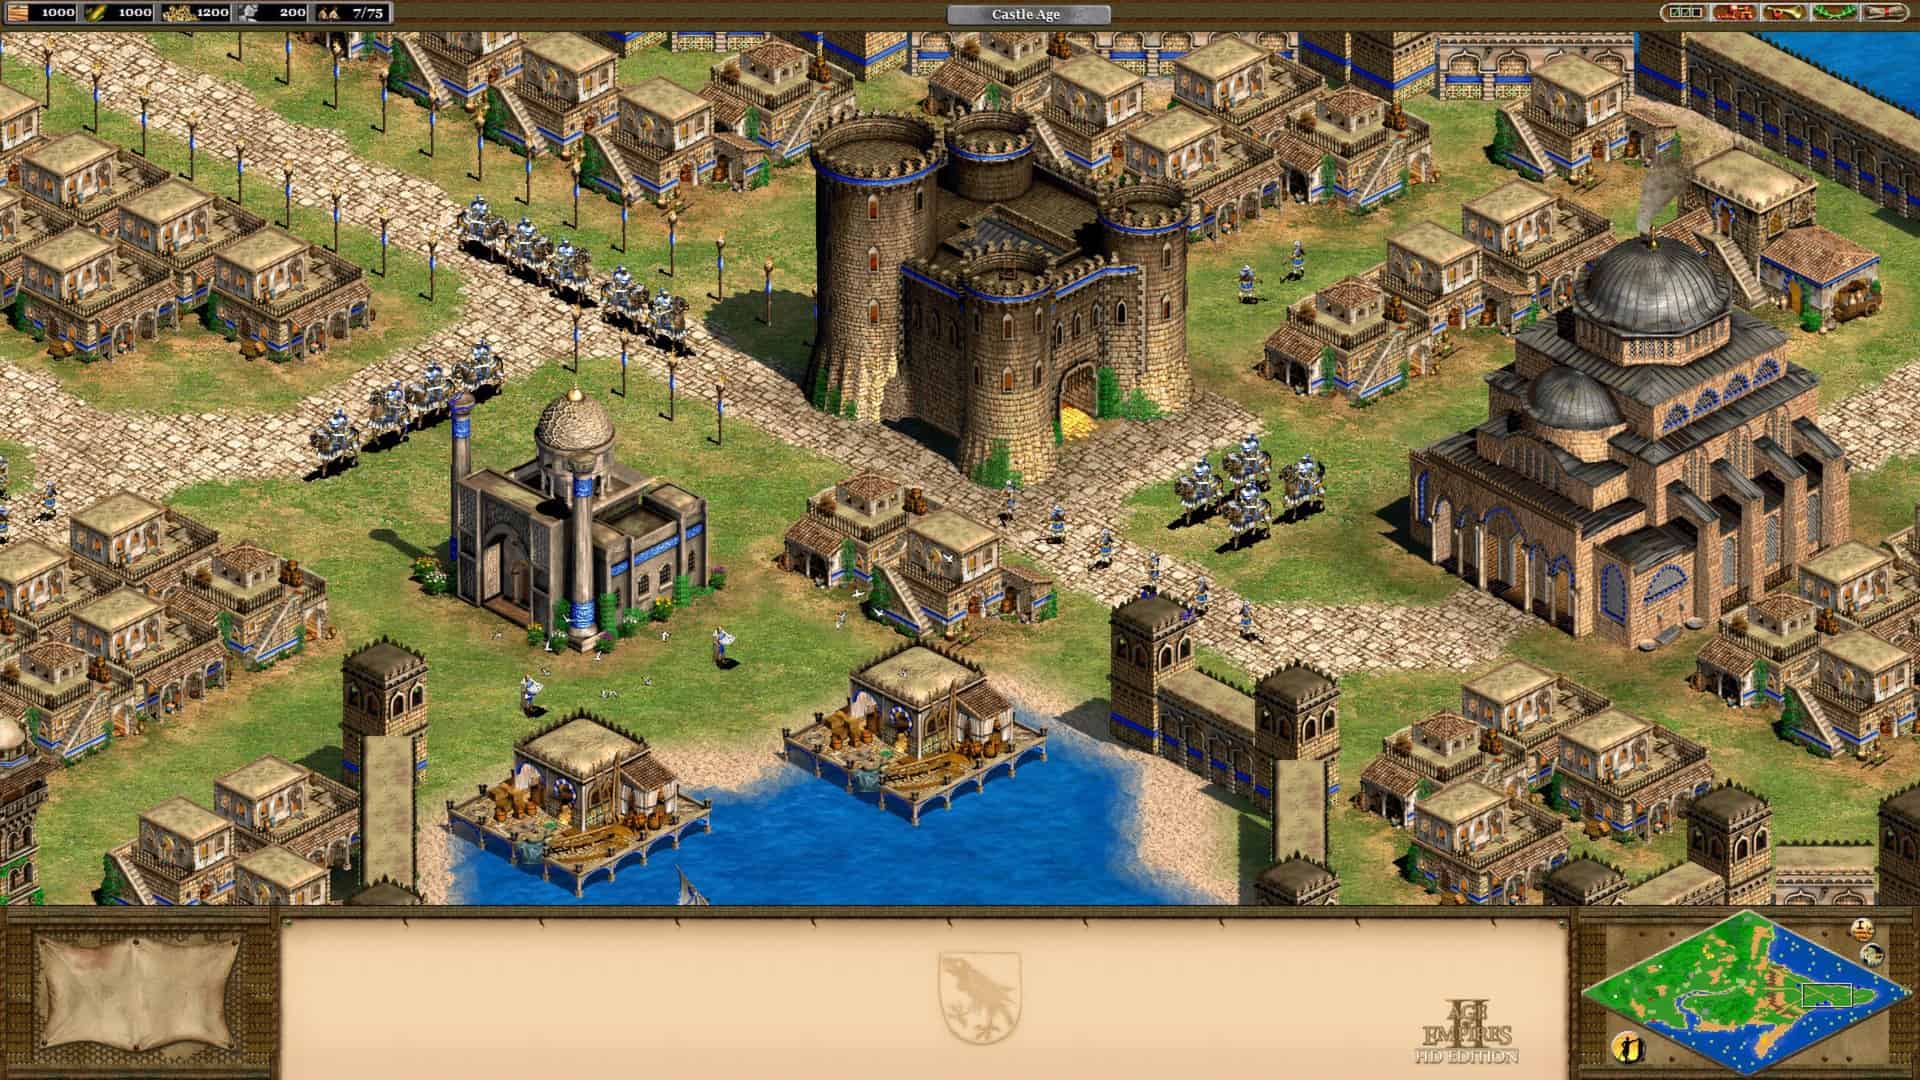 Screenshot from the computer game Age of Empires II